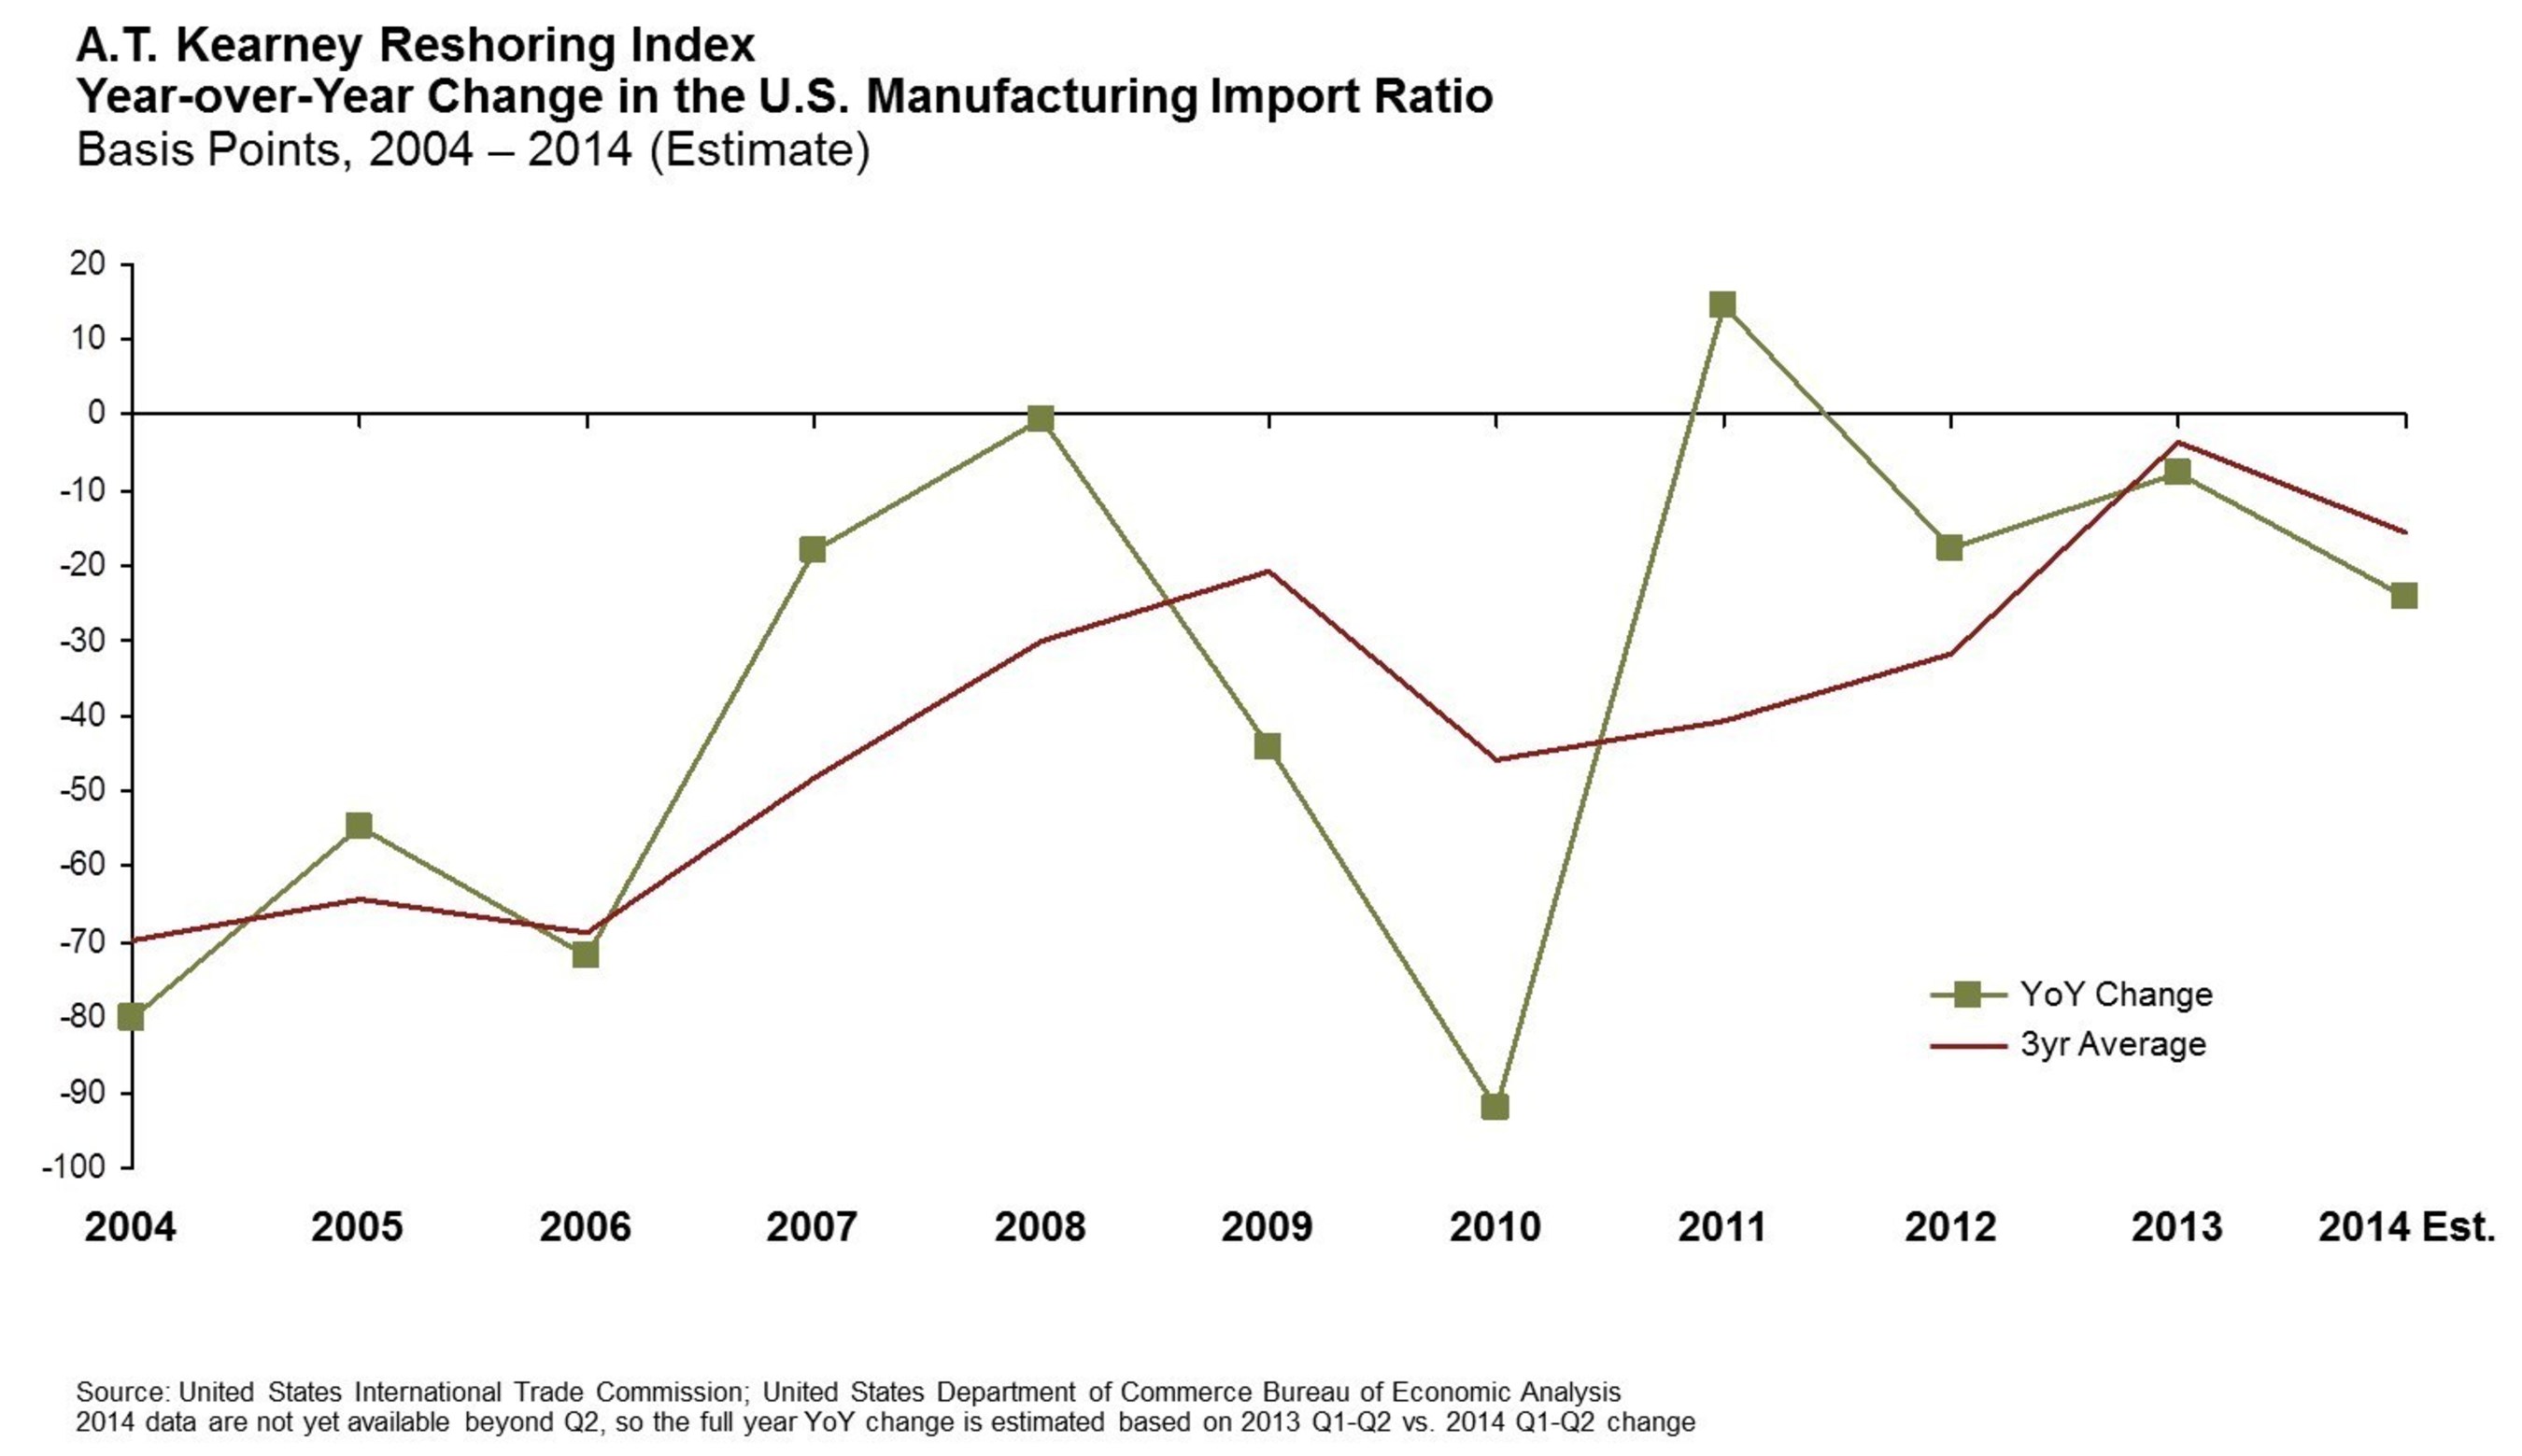 A.T. Kearney Reshoring Index - Year-over-Year Change in the U.S. Manufacturing Import Ratio